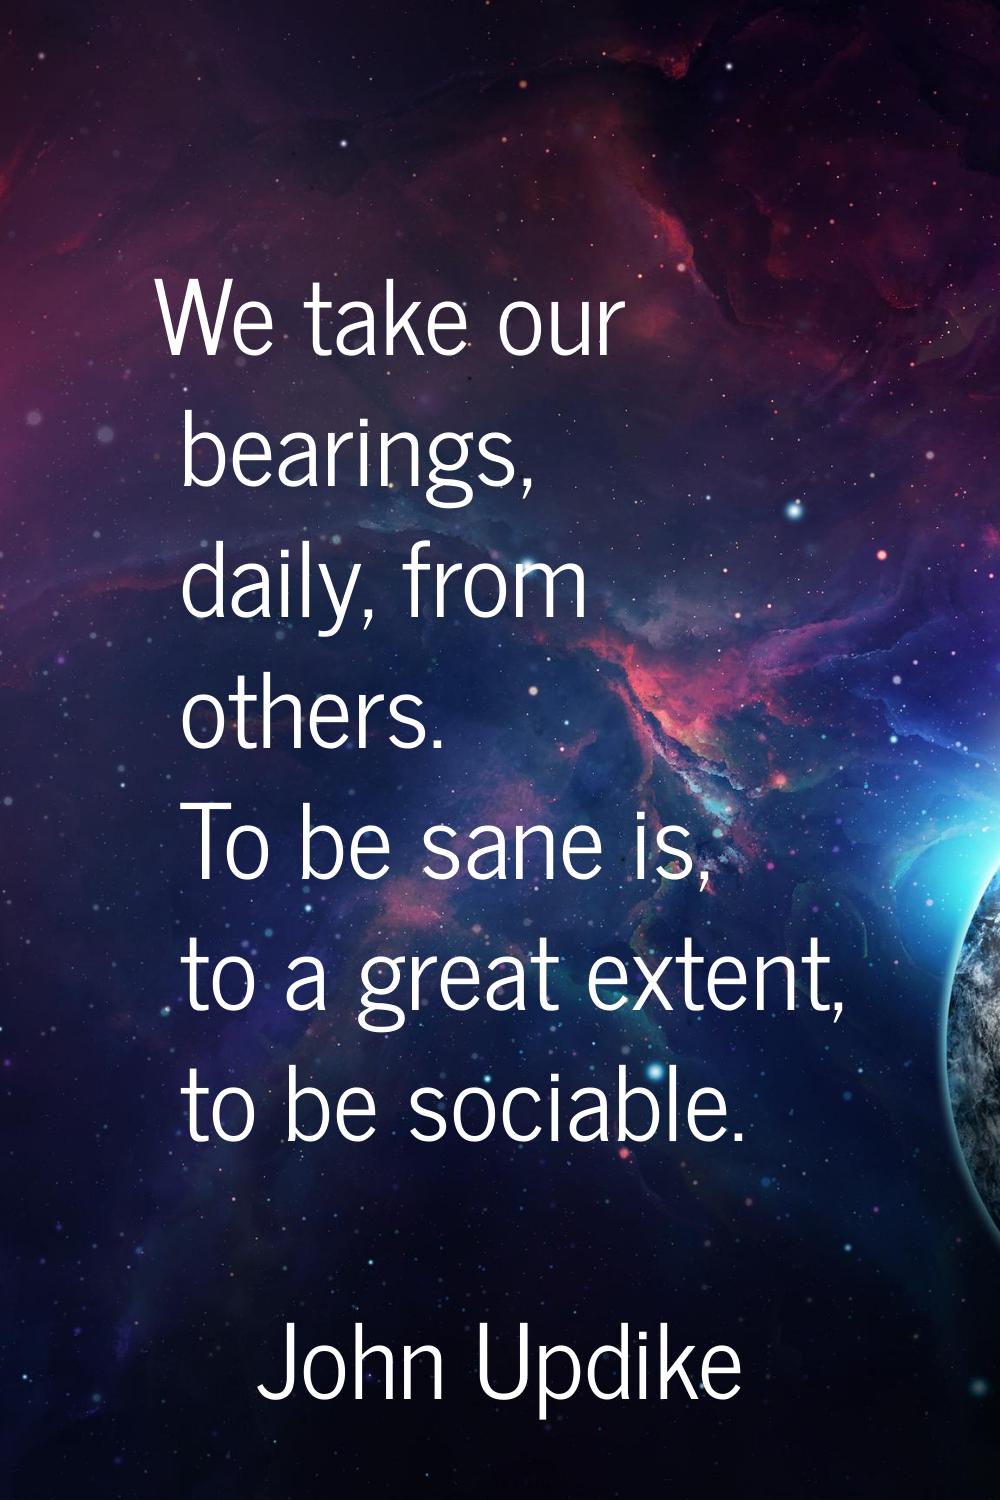 We take our bearings, daily, from others. To be sane is, to a great extent, to be sociable.